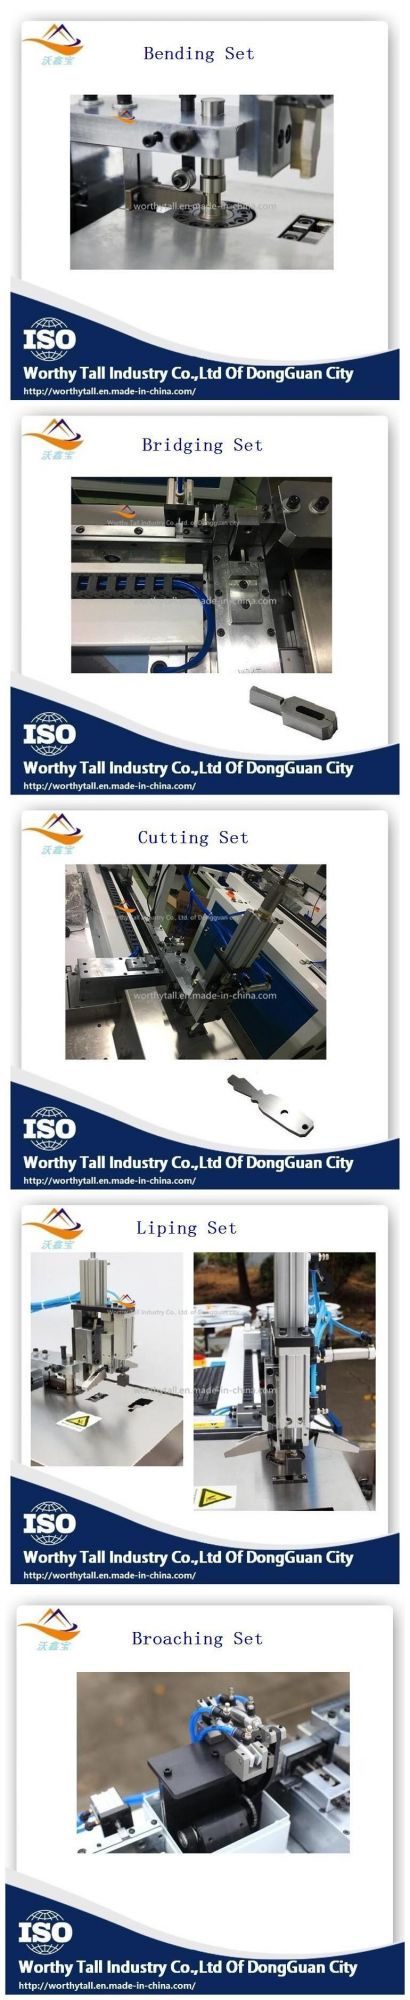 High Efficient Bending Machine for Bags Making Industry